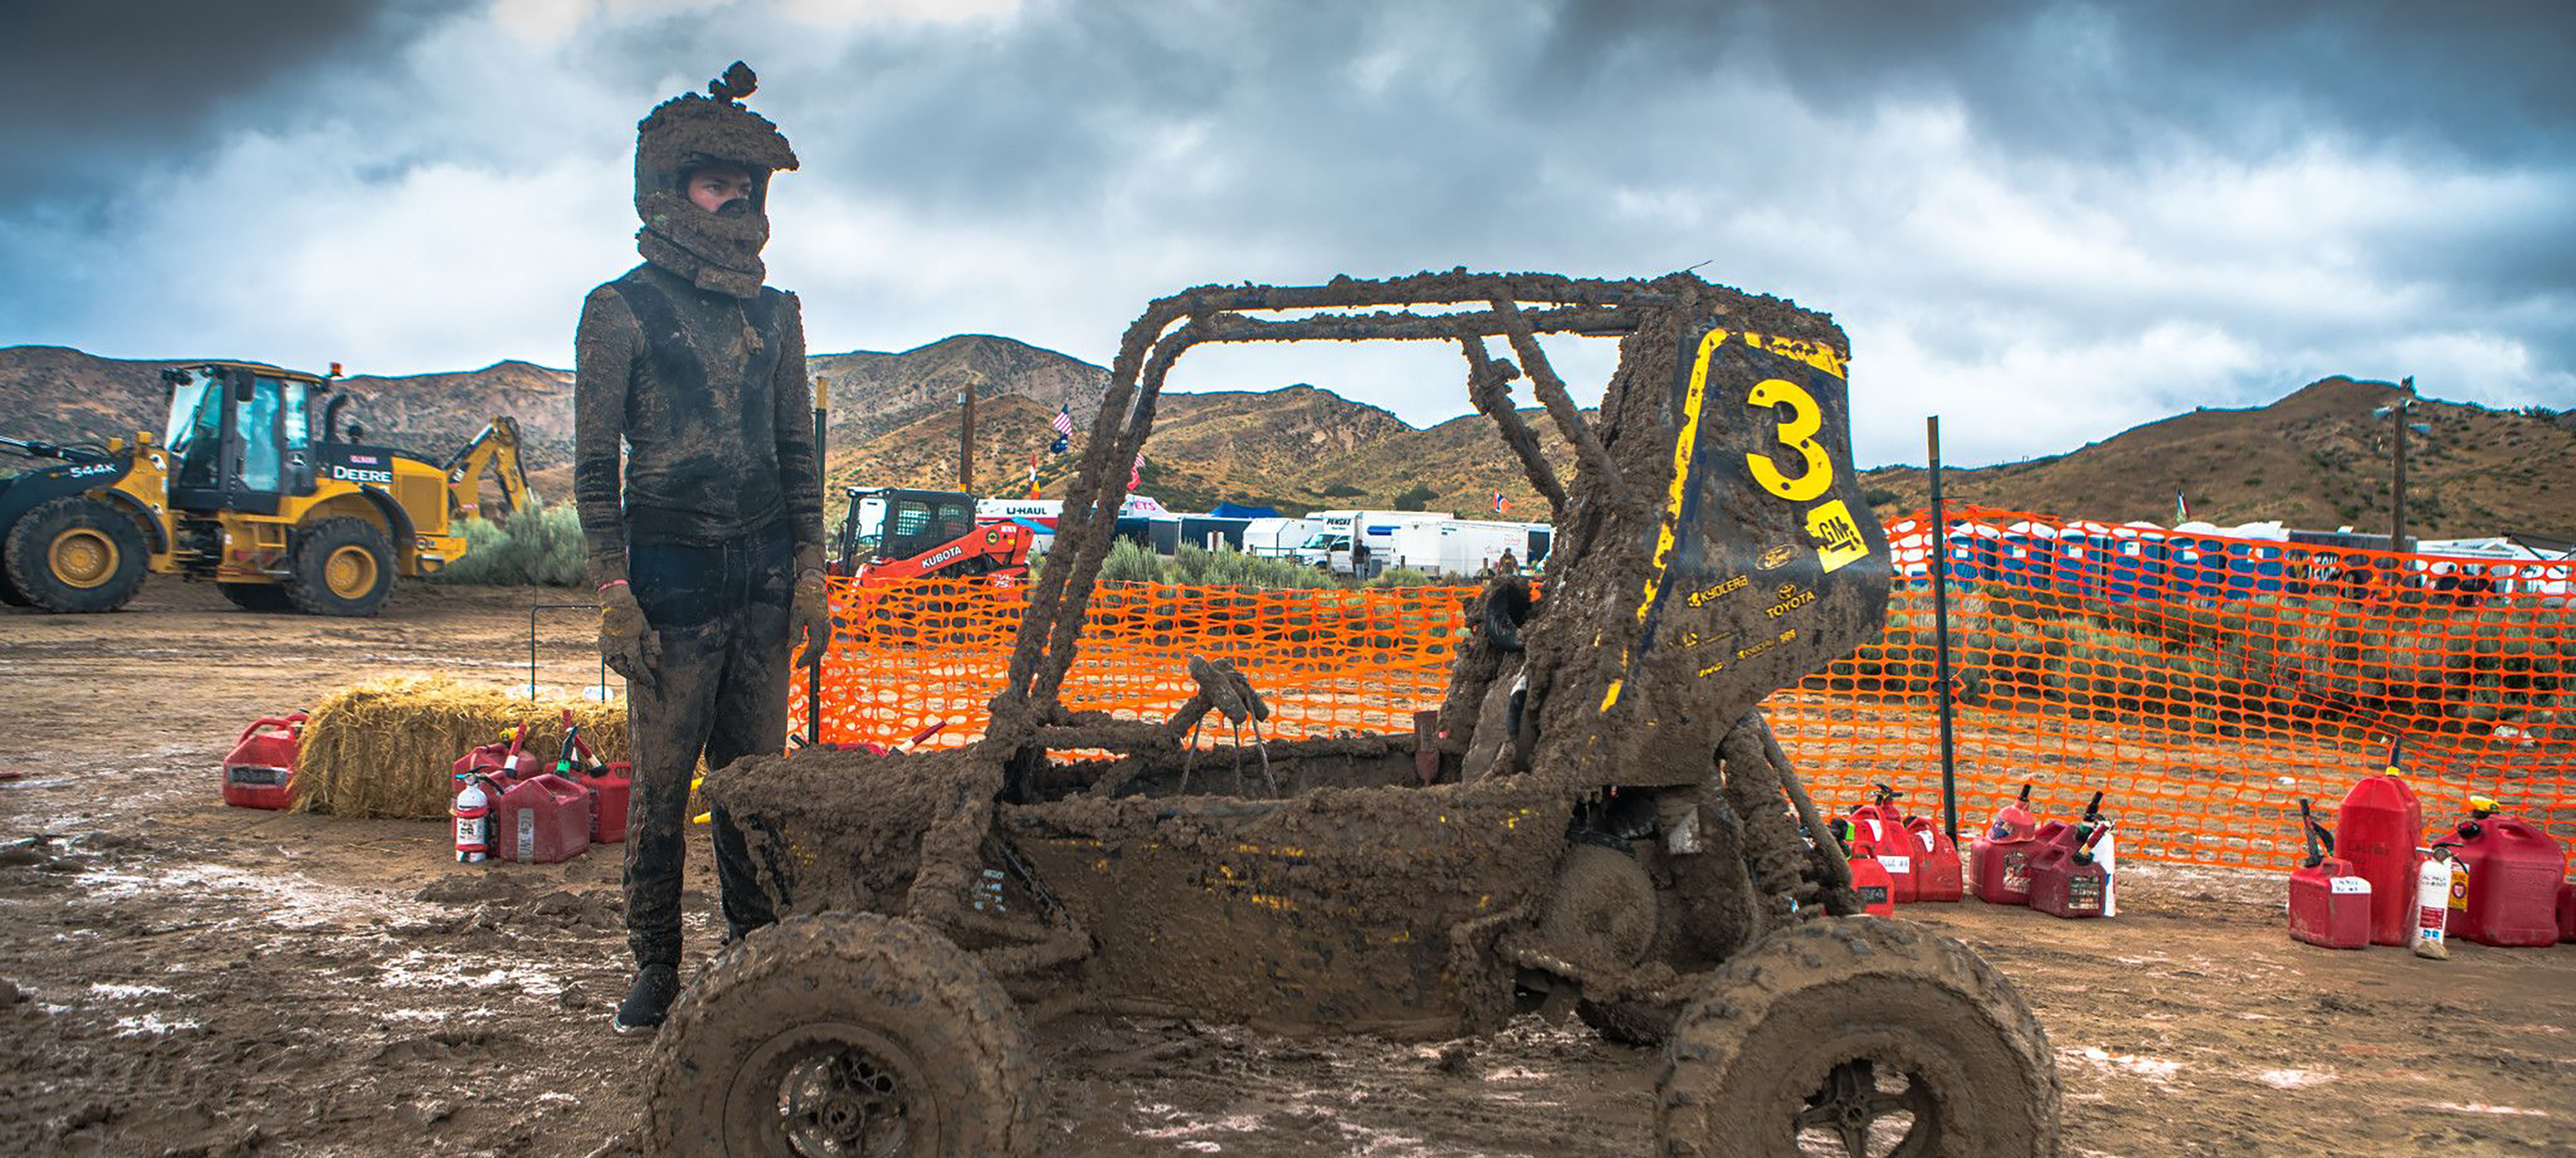 Baja Racing breaks records while leaving the competition in the dust